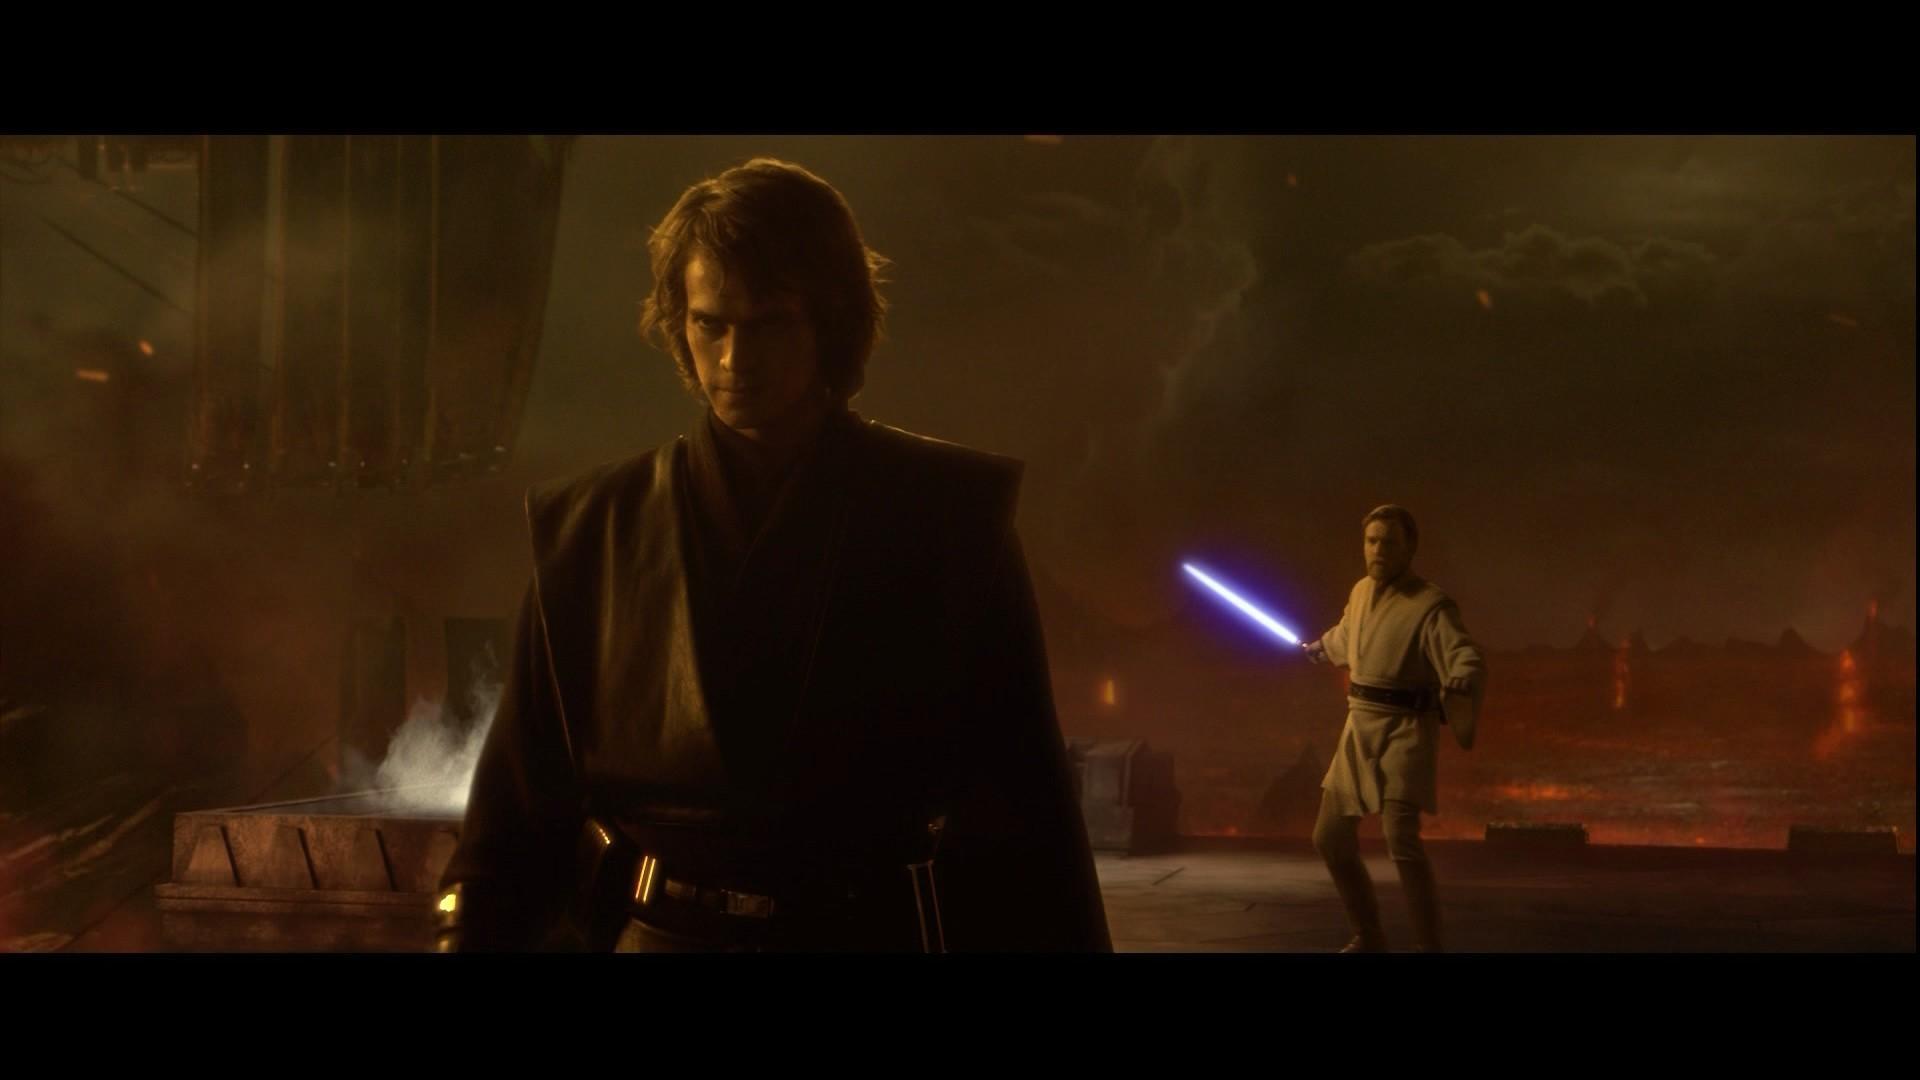 Image Gallery For Star Wars Episode Iii Revenge Of The Sith